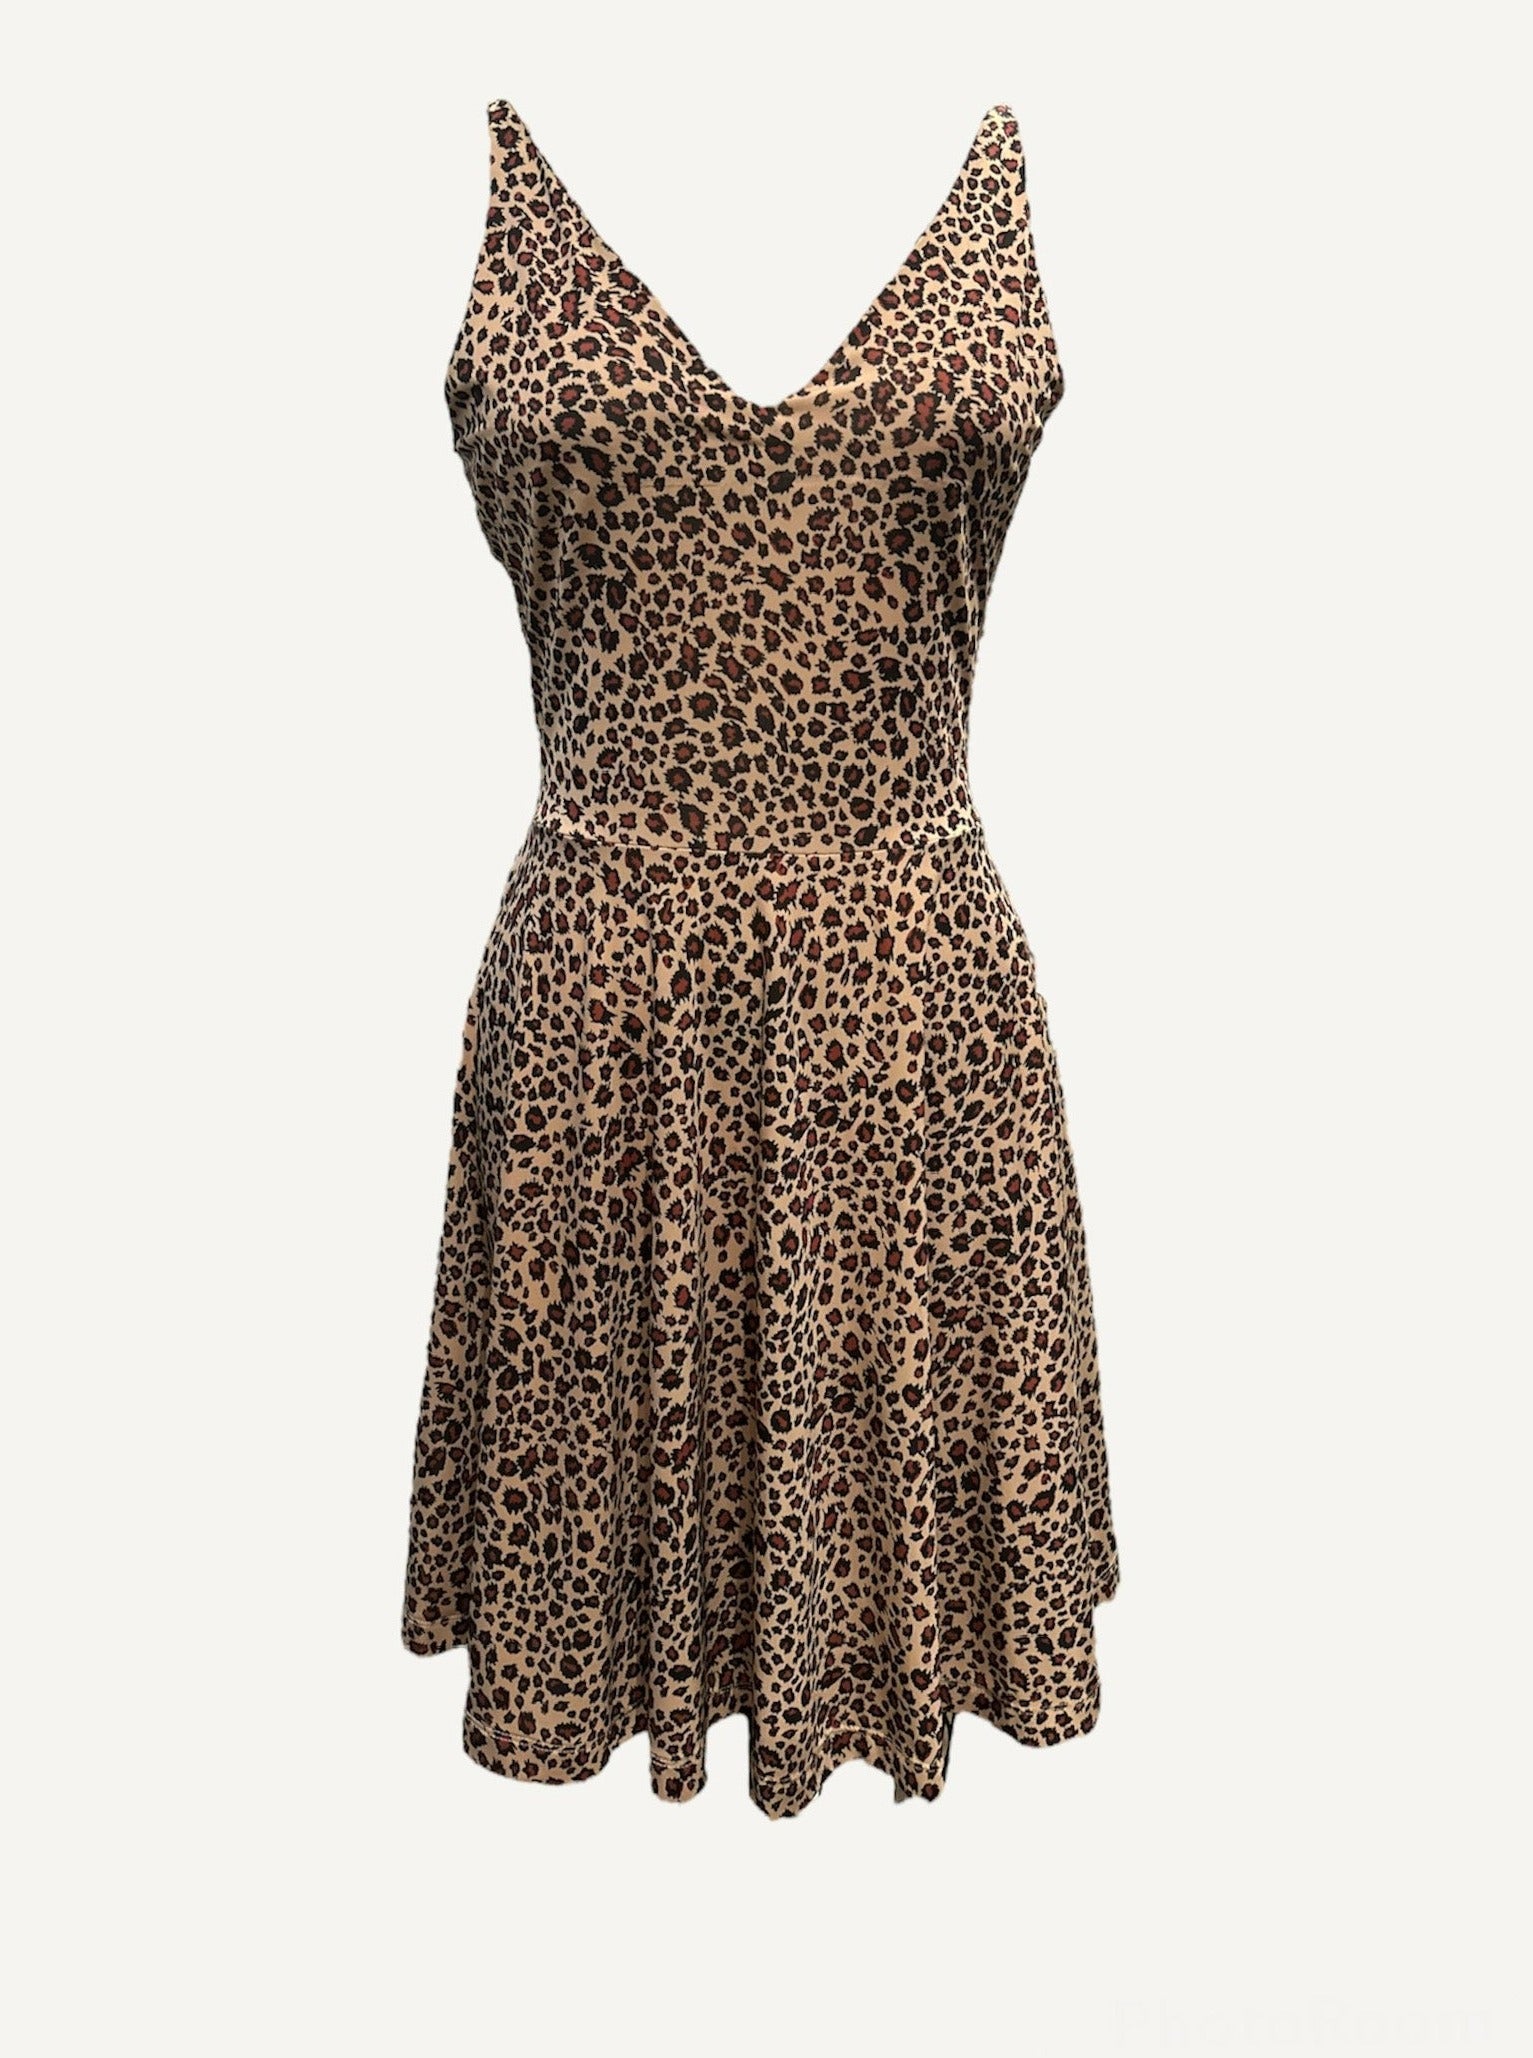 a leopard animal print dress with a v-neck and no sleeves